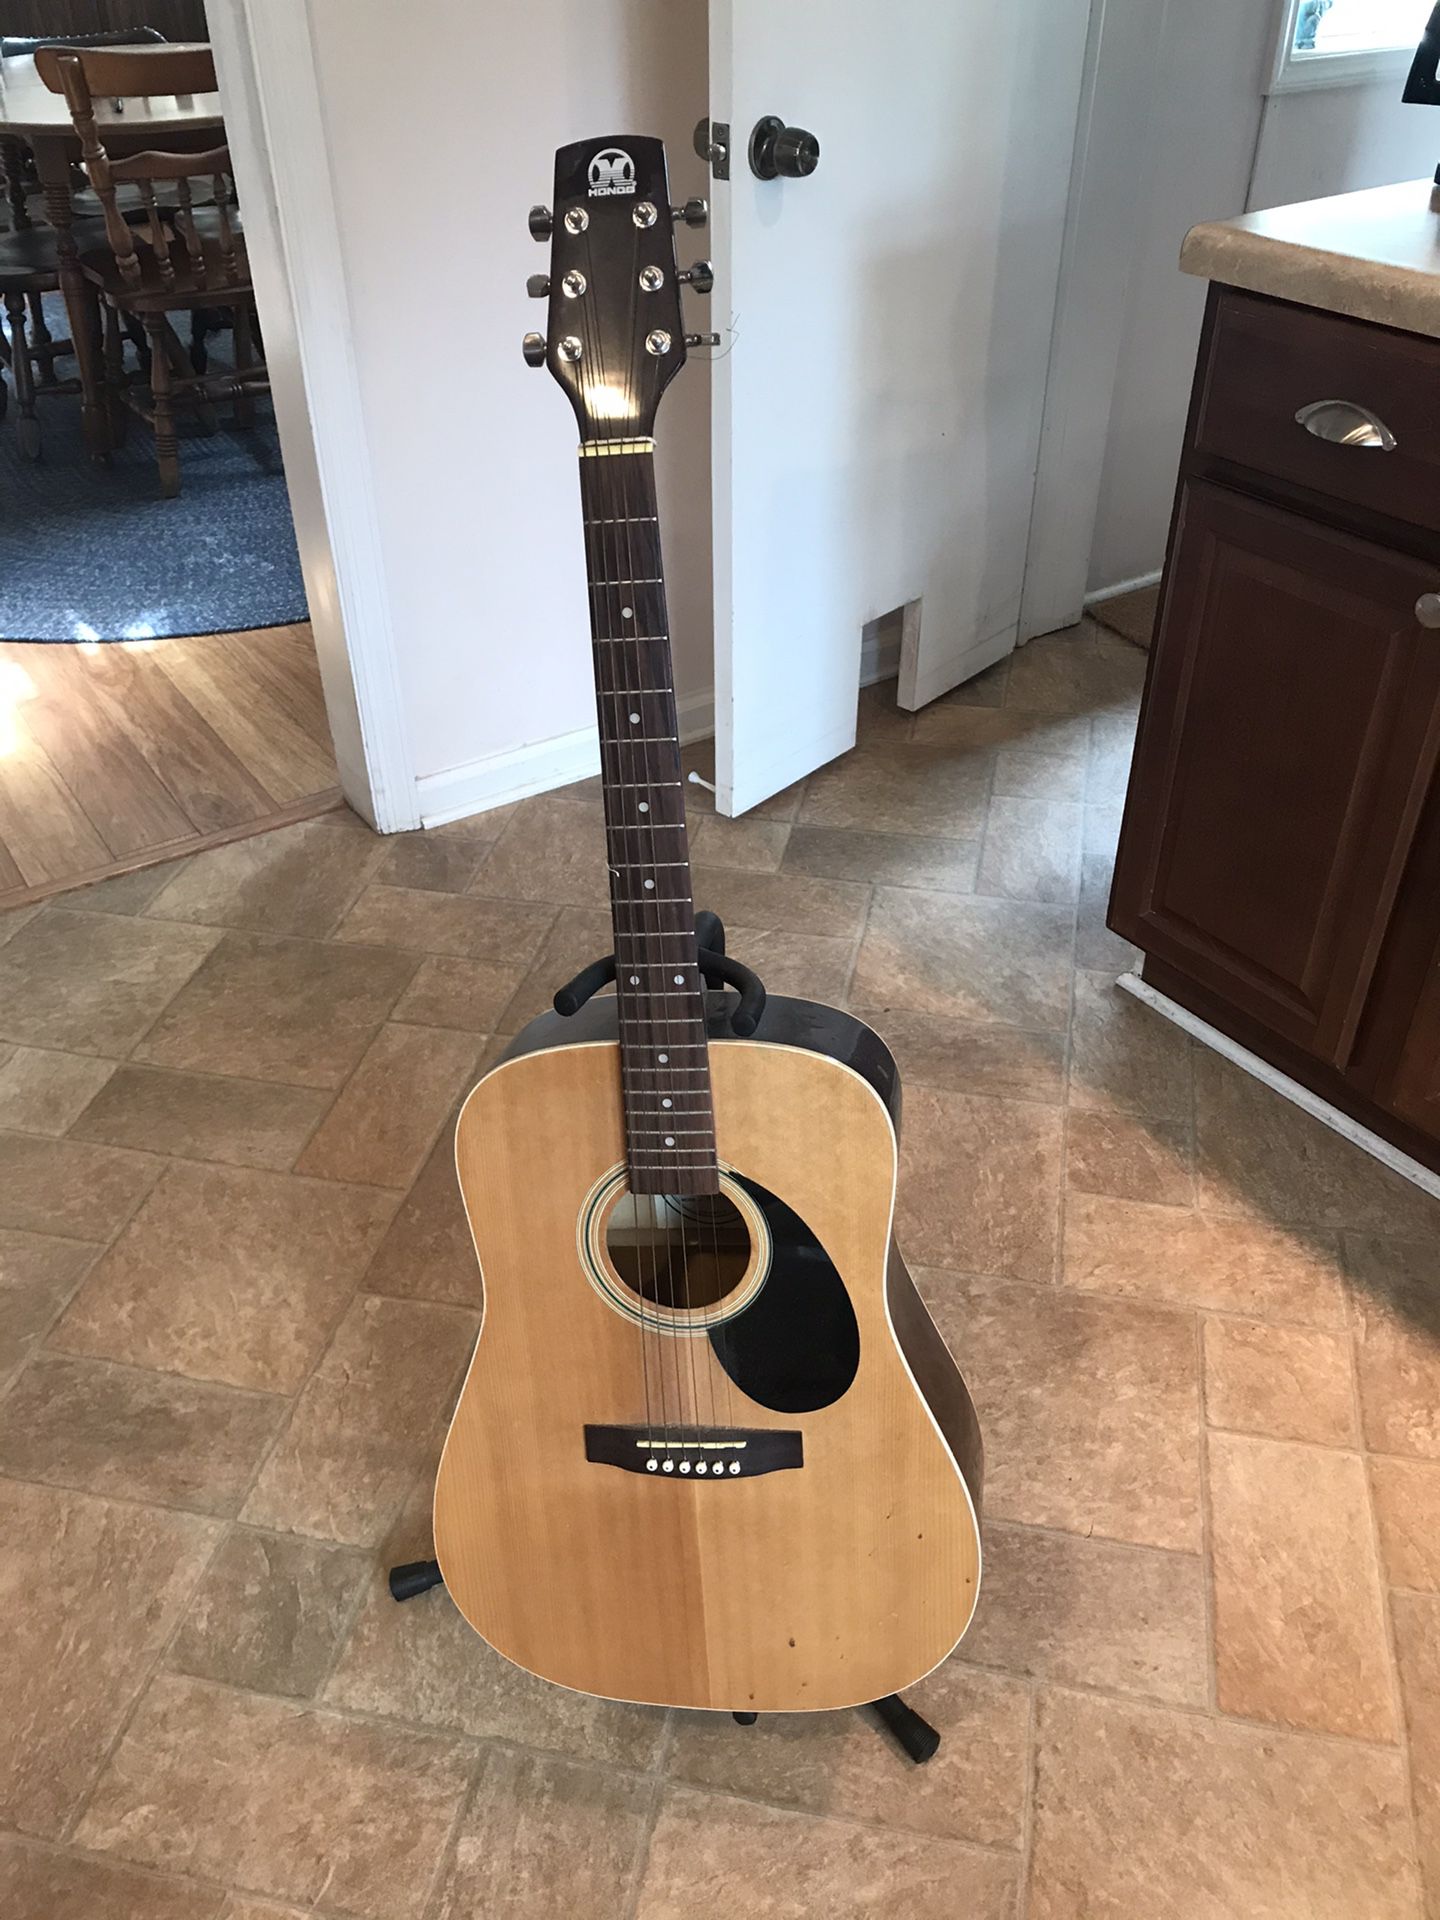 Hondo acoustic guitar model: H-115N and stand